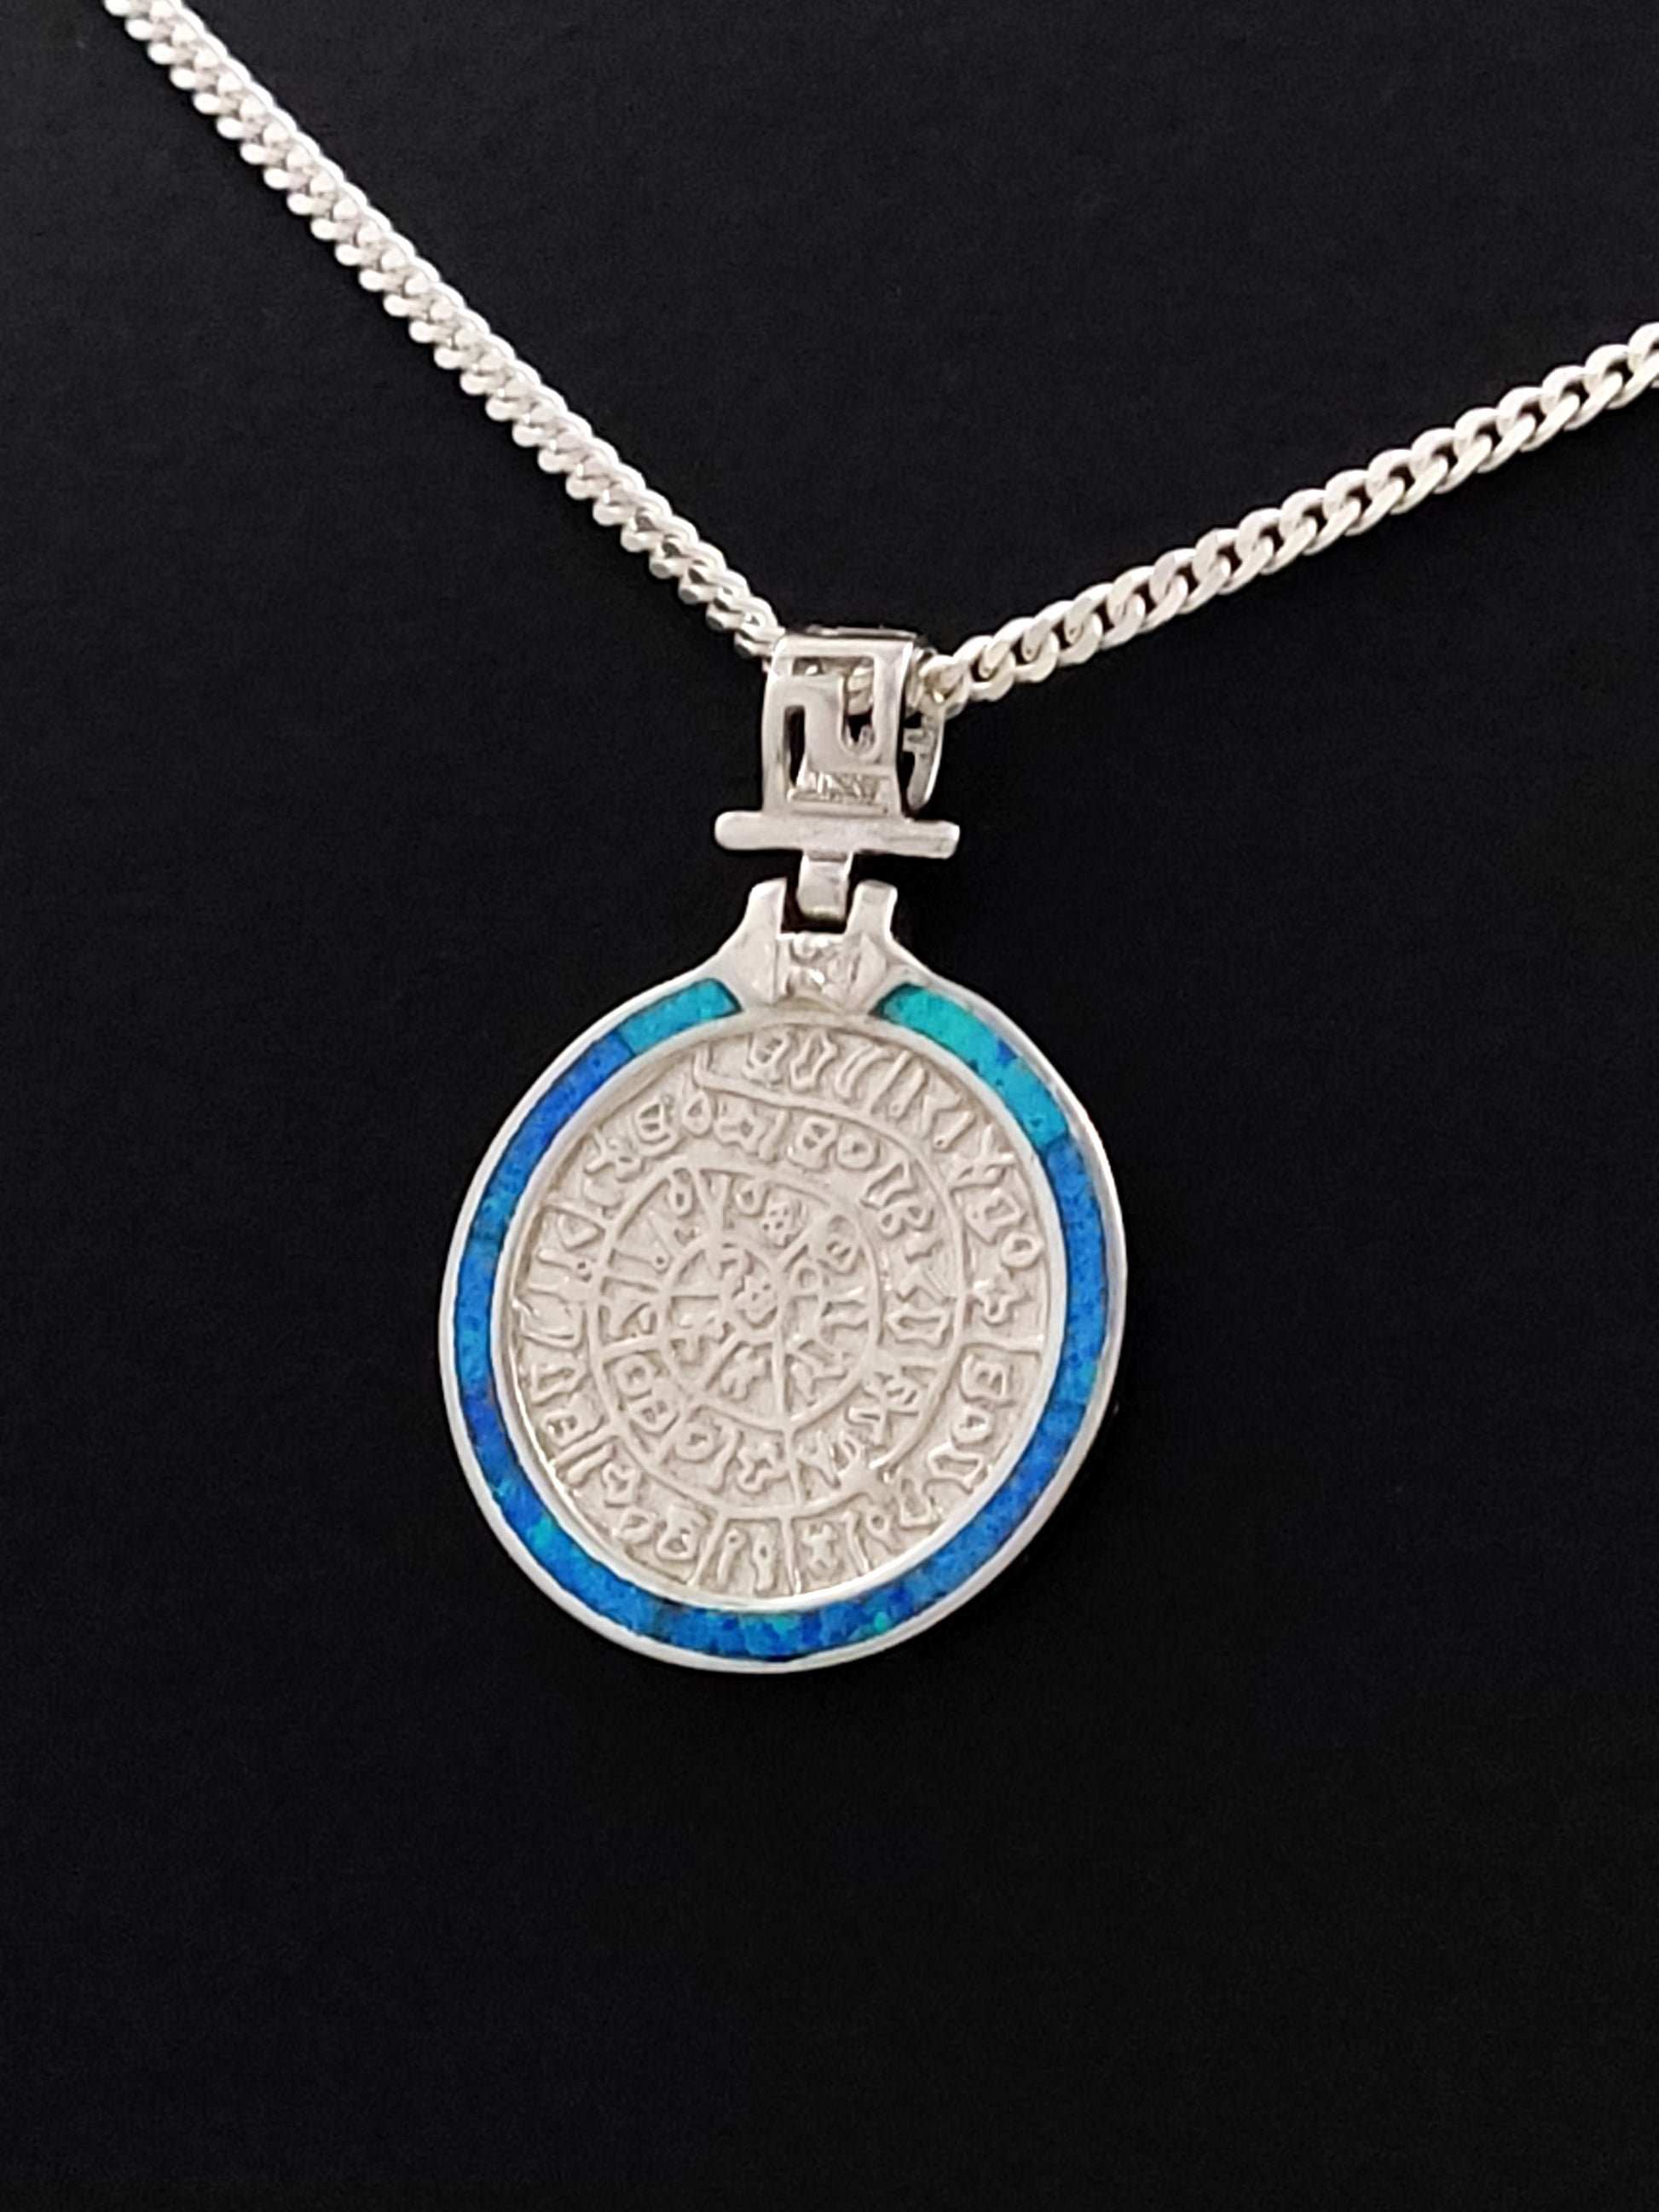 Phaistos Disc Greek silver necklace with blue opal pendant measuring 22mm in diameter.